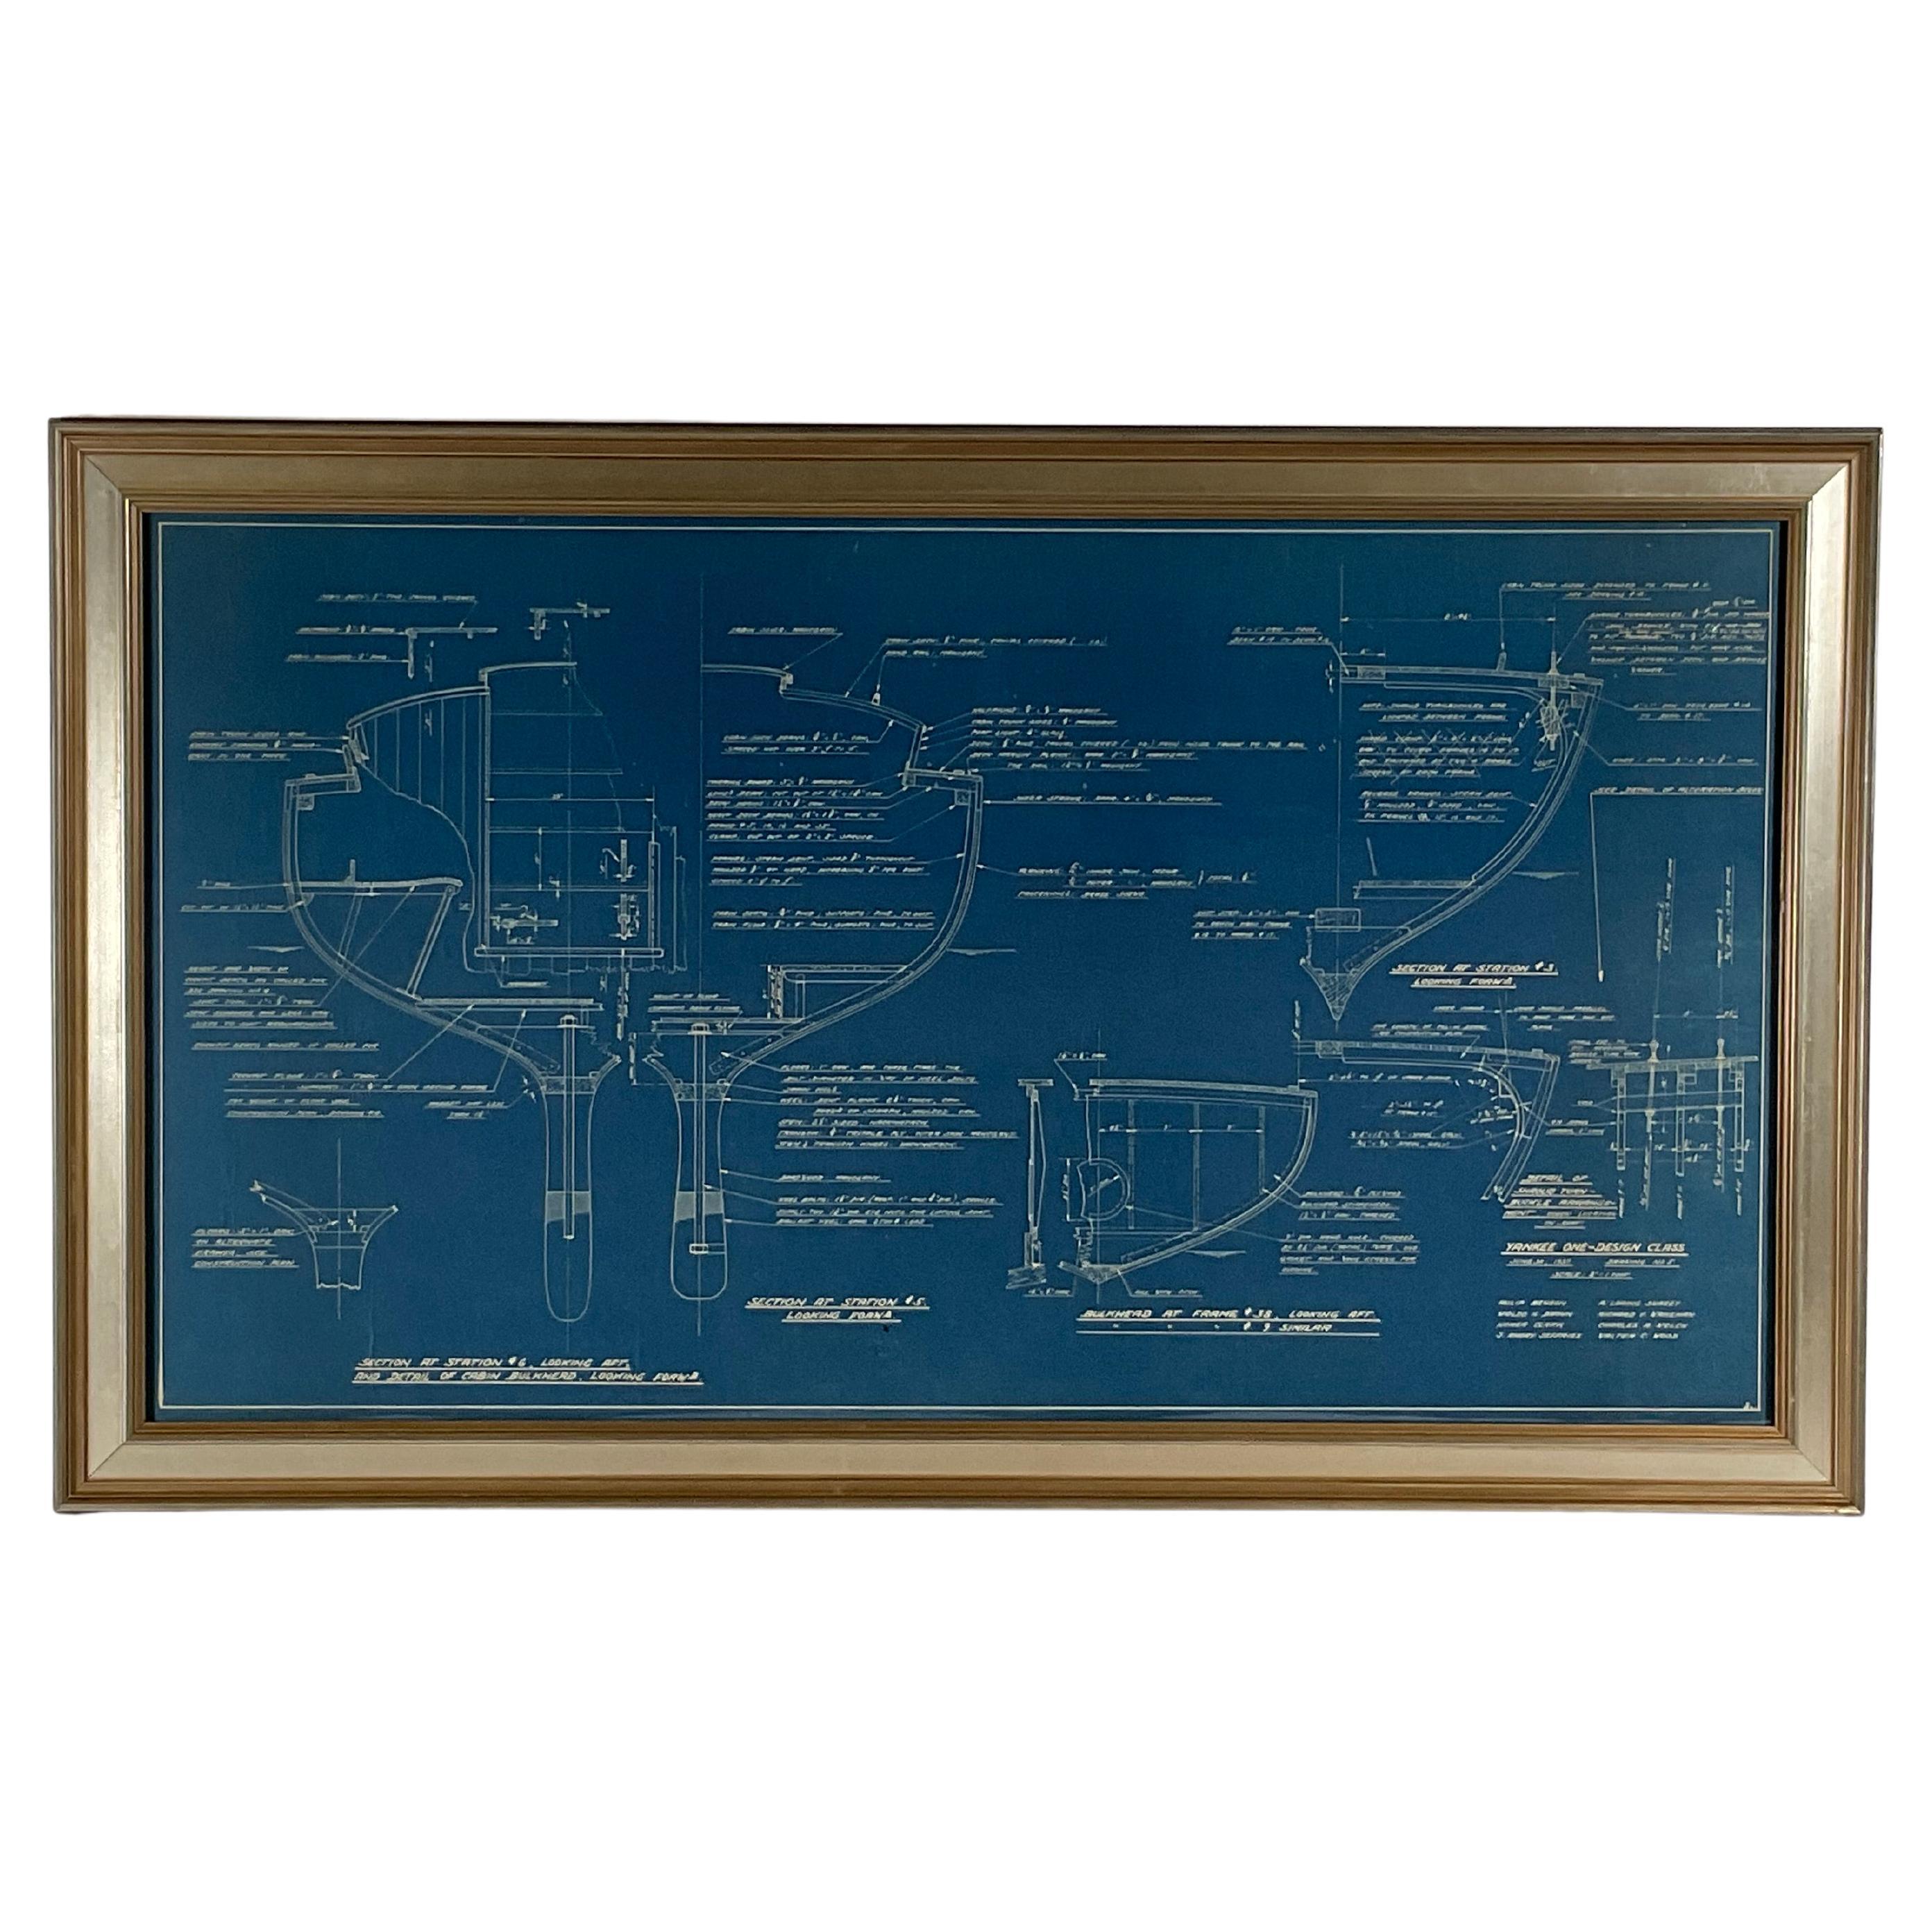 Yankee One Design Class Hull Blueprint For Sale